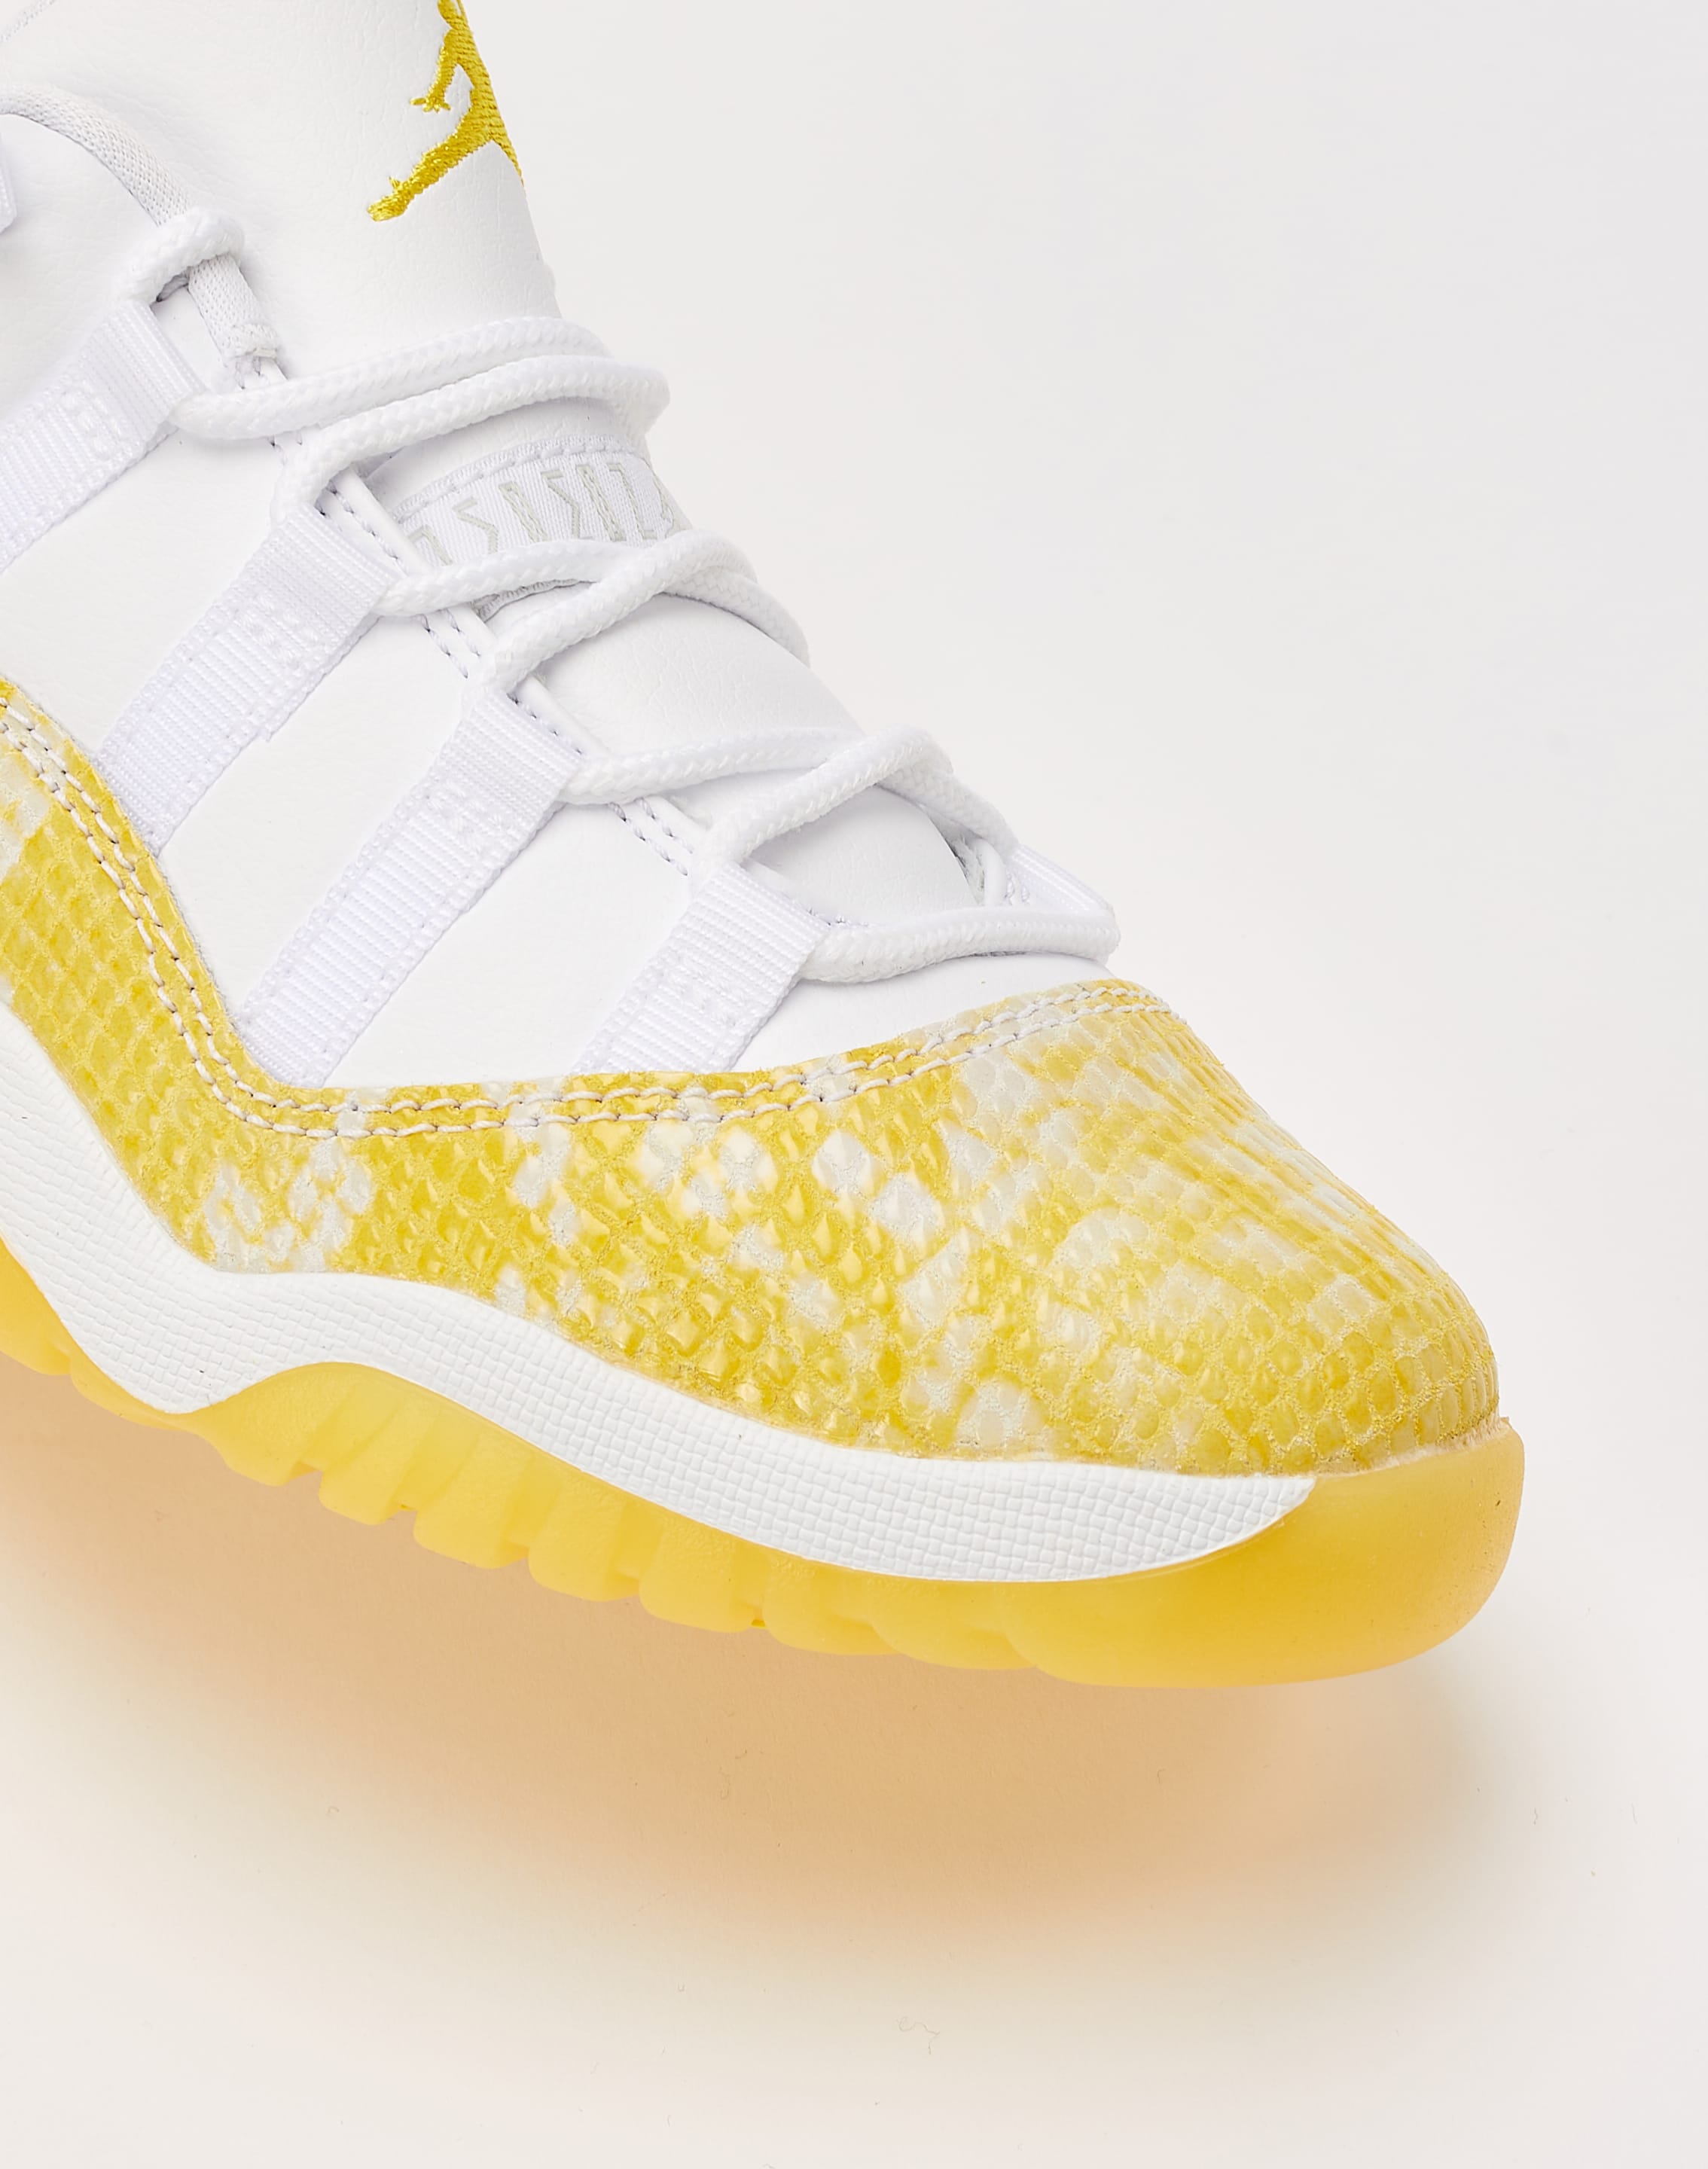 Where to Buy the Air Jordan whitelaser 11 Low 'RE2PECT' Official Images  “Playoffs”, Sb-roscoffShops°